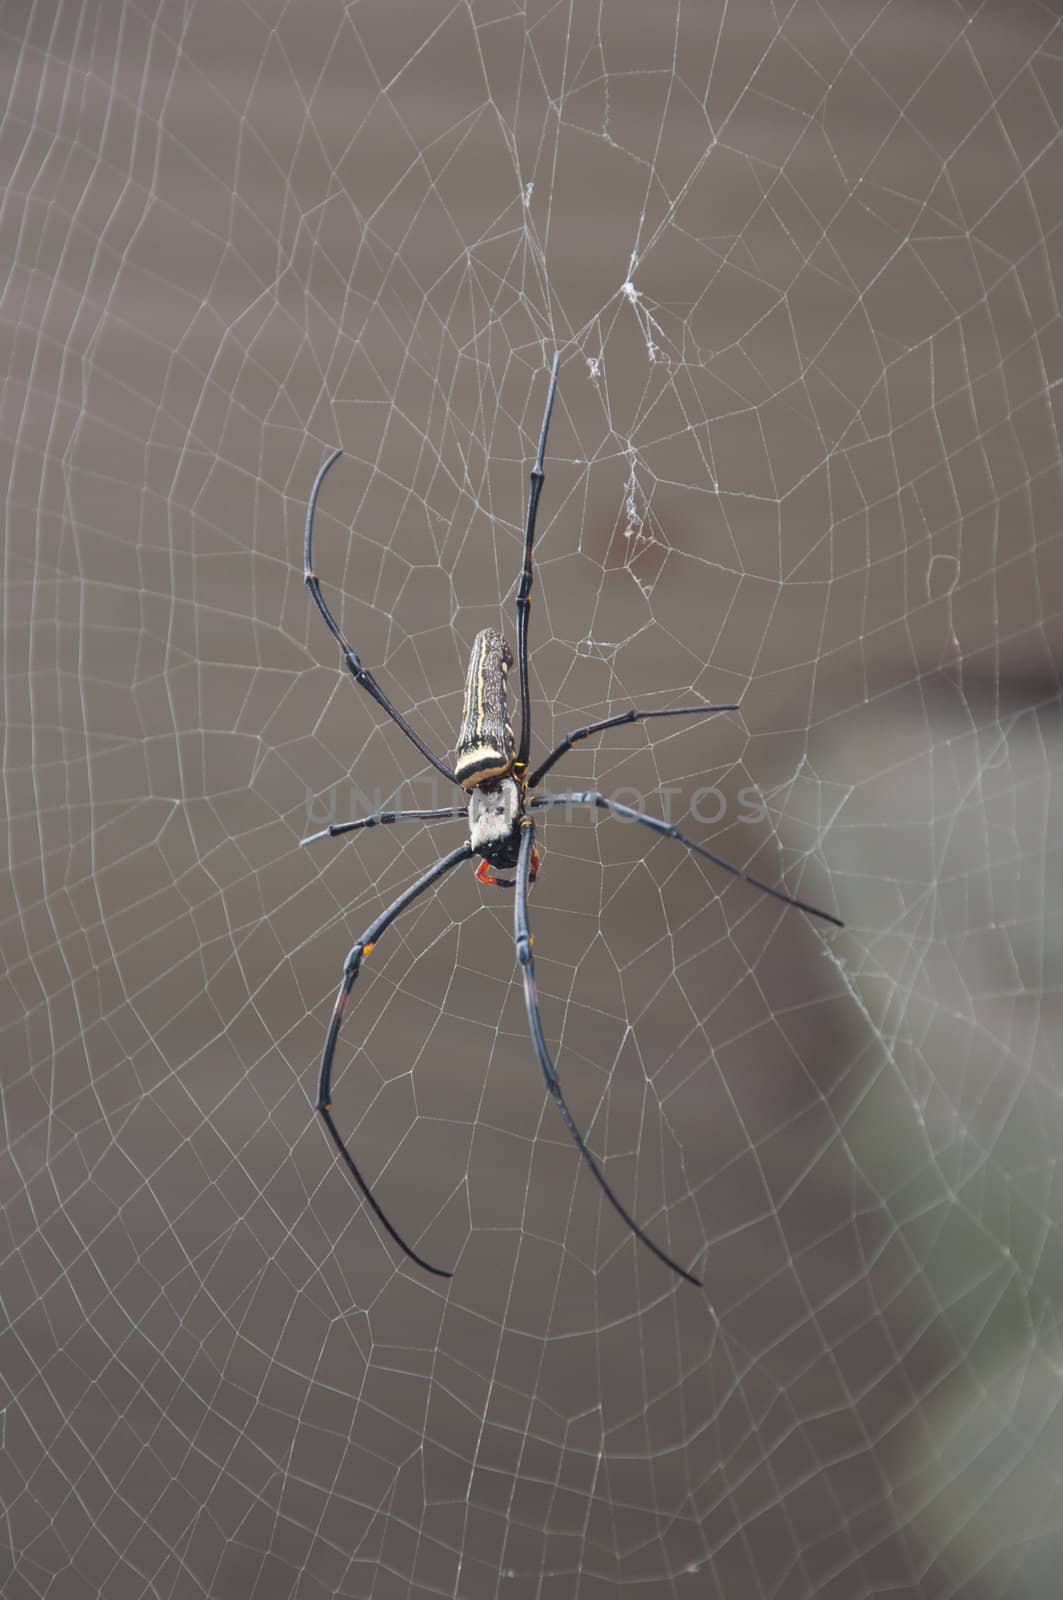 Golden Orb Web Spider, Nephila maculata by ngarare